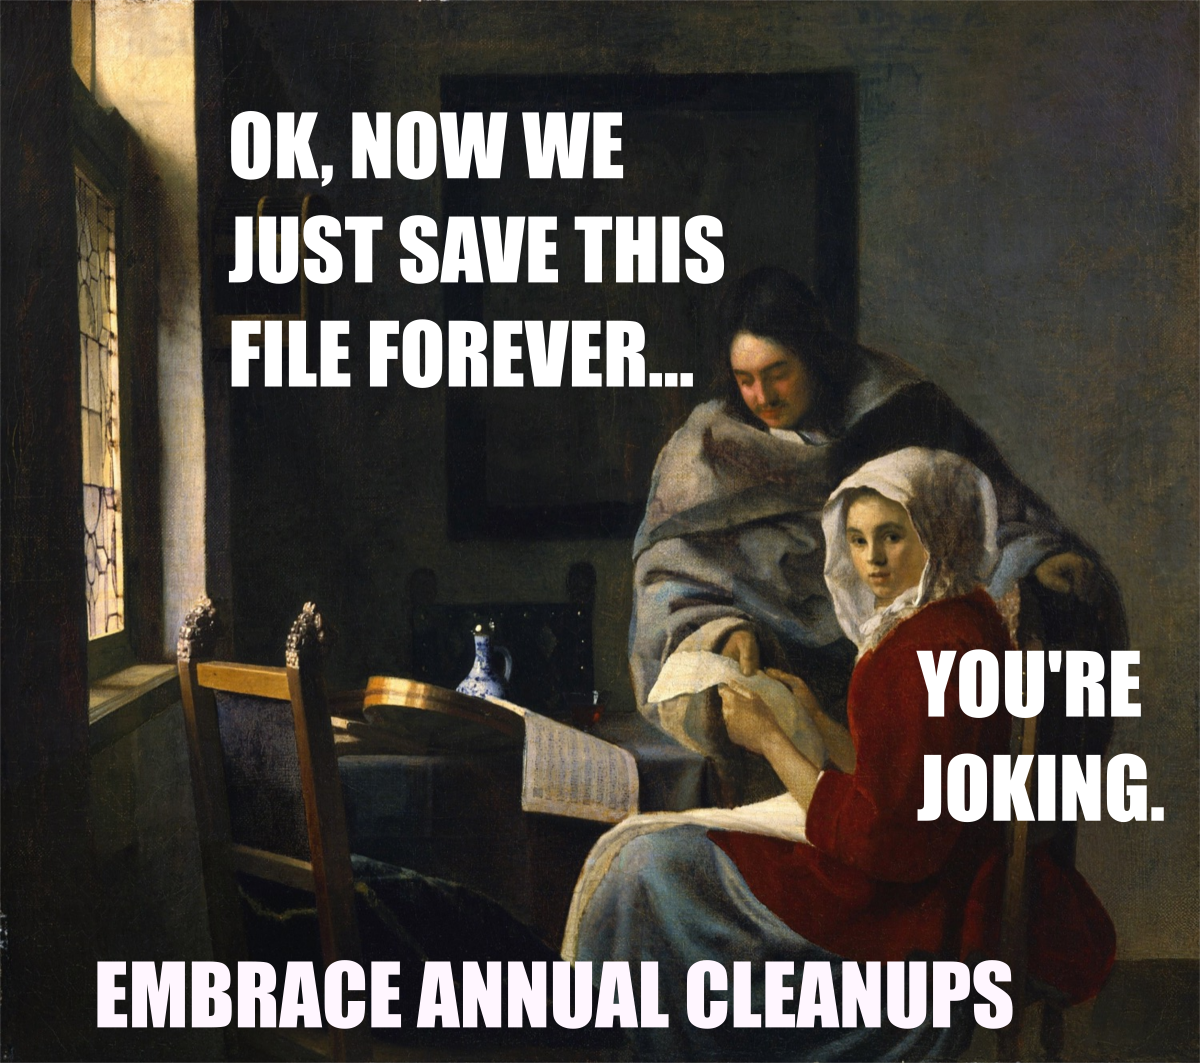 OK, now we just save this file forever... You're joking. Embrace annual cleanups.